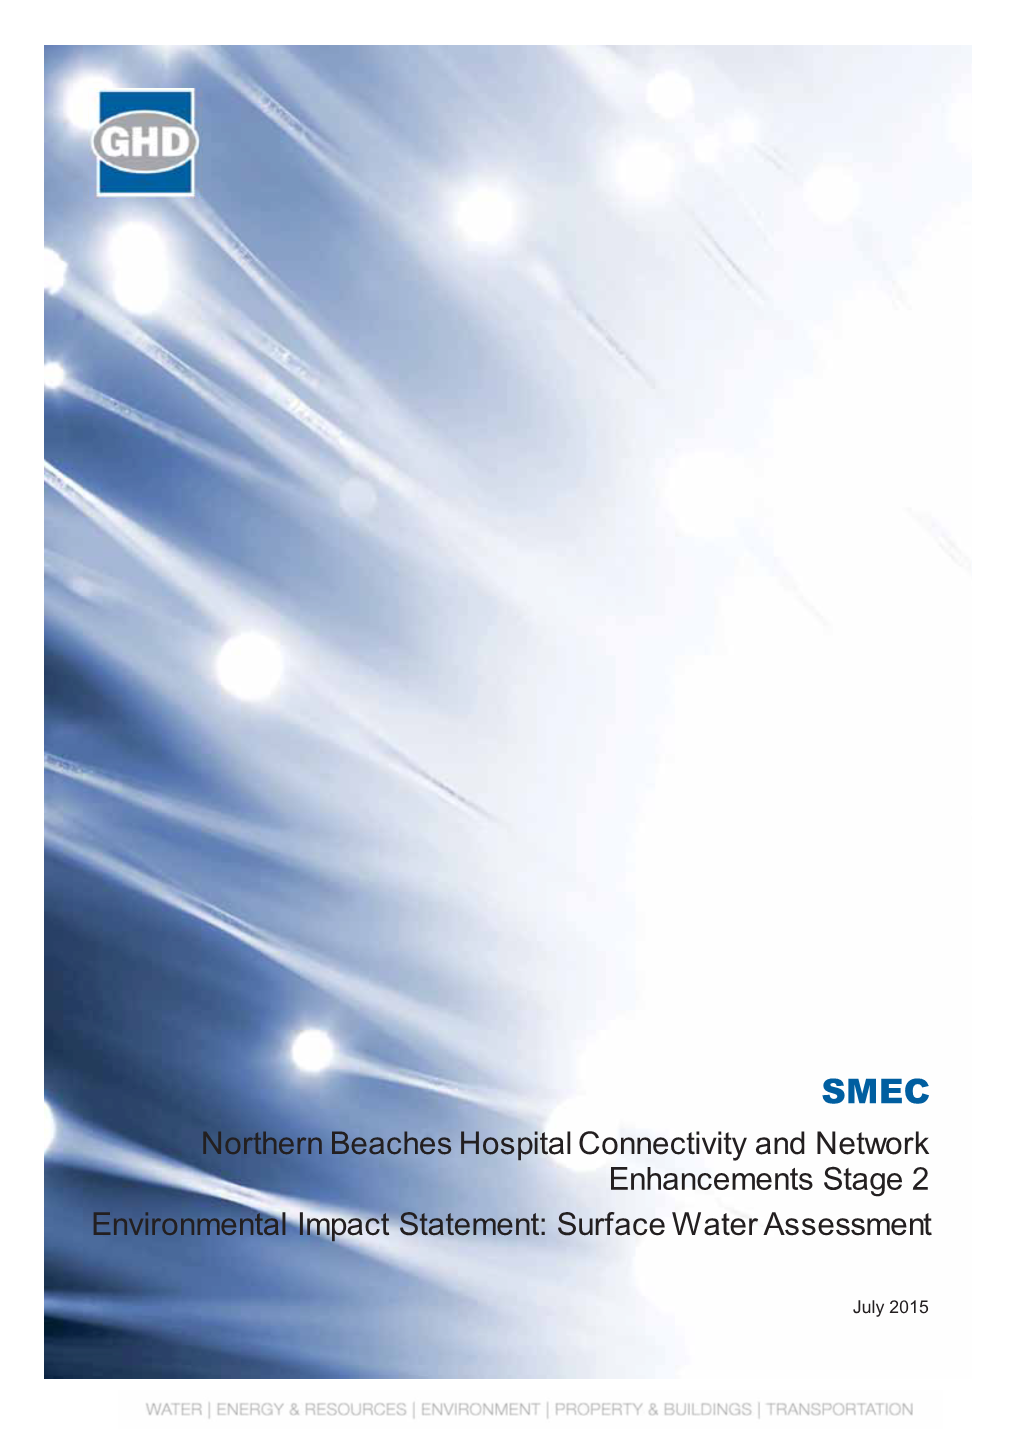 Northern Beaches Hospital Connectivity and Network Enhancements Stage 2 Environmental Impact Statement: Surface Water Assessment